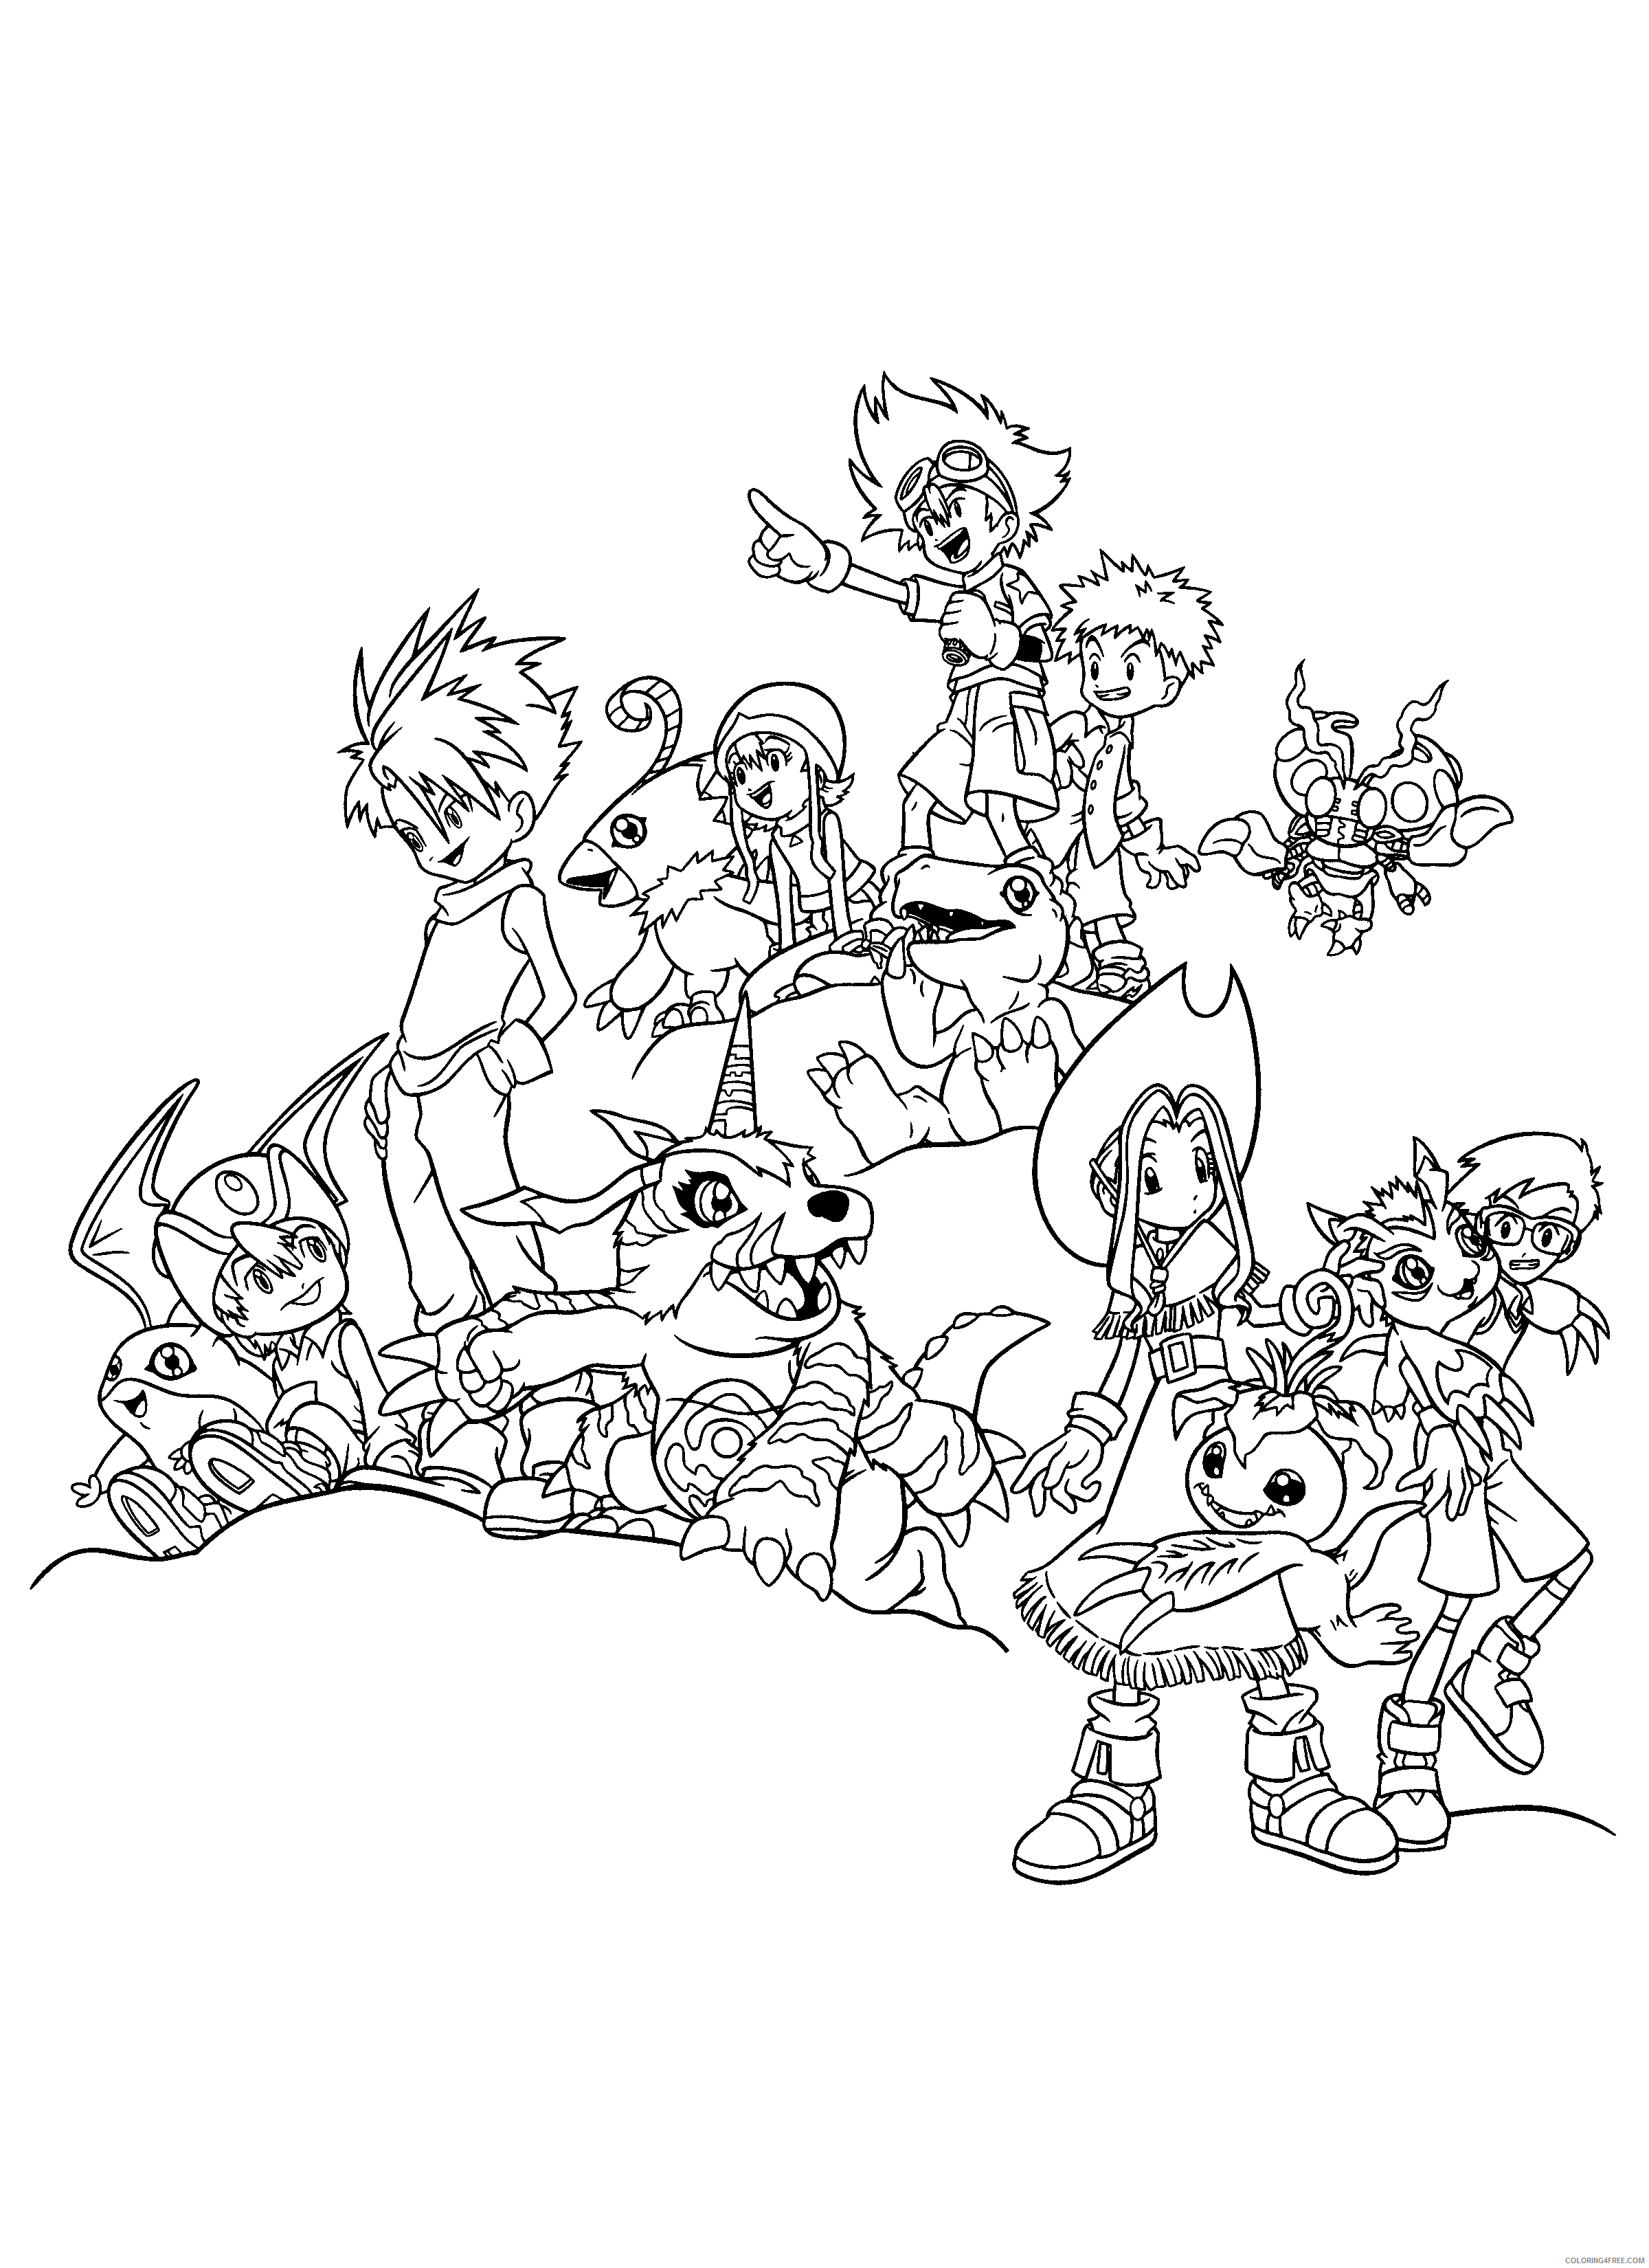 Digimon Printable Coloring Pages Anime digimon 265 2021 0346 Coloring4free